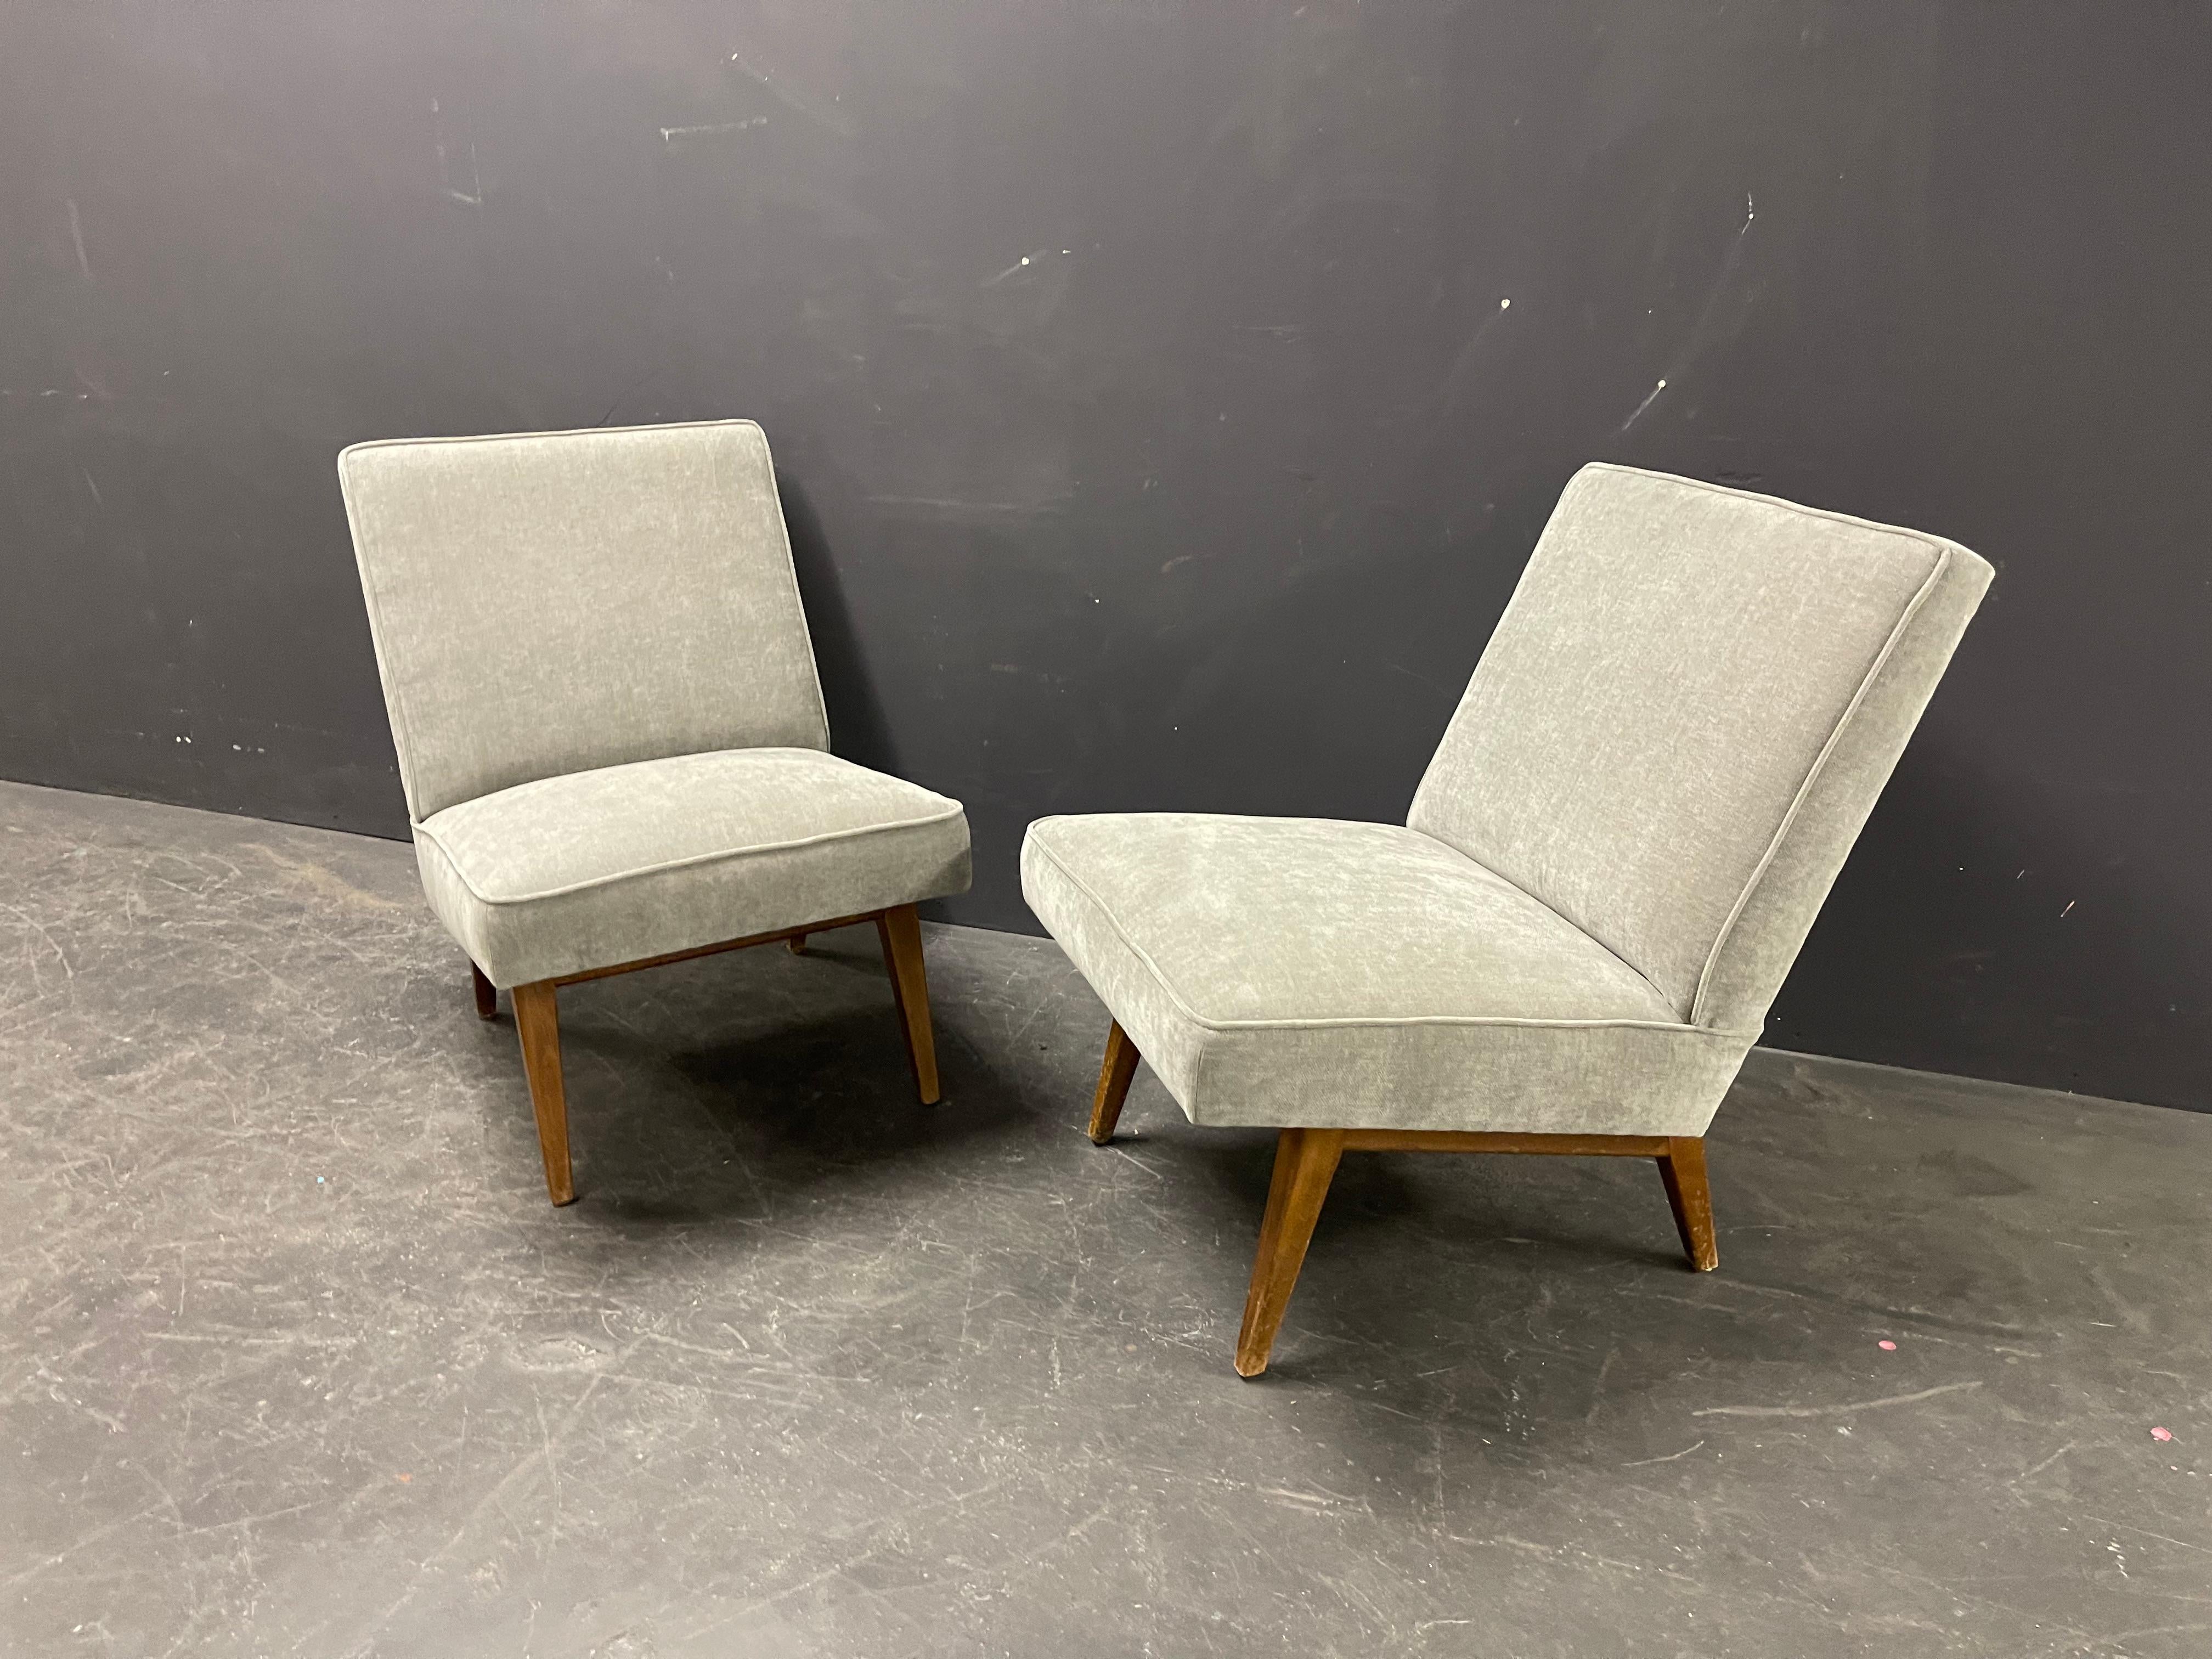 American Rare Pair of Jens Risom Lounge Chairs